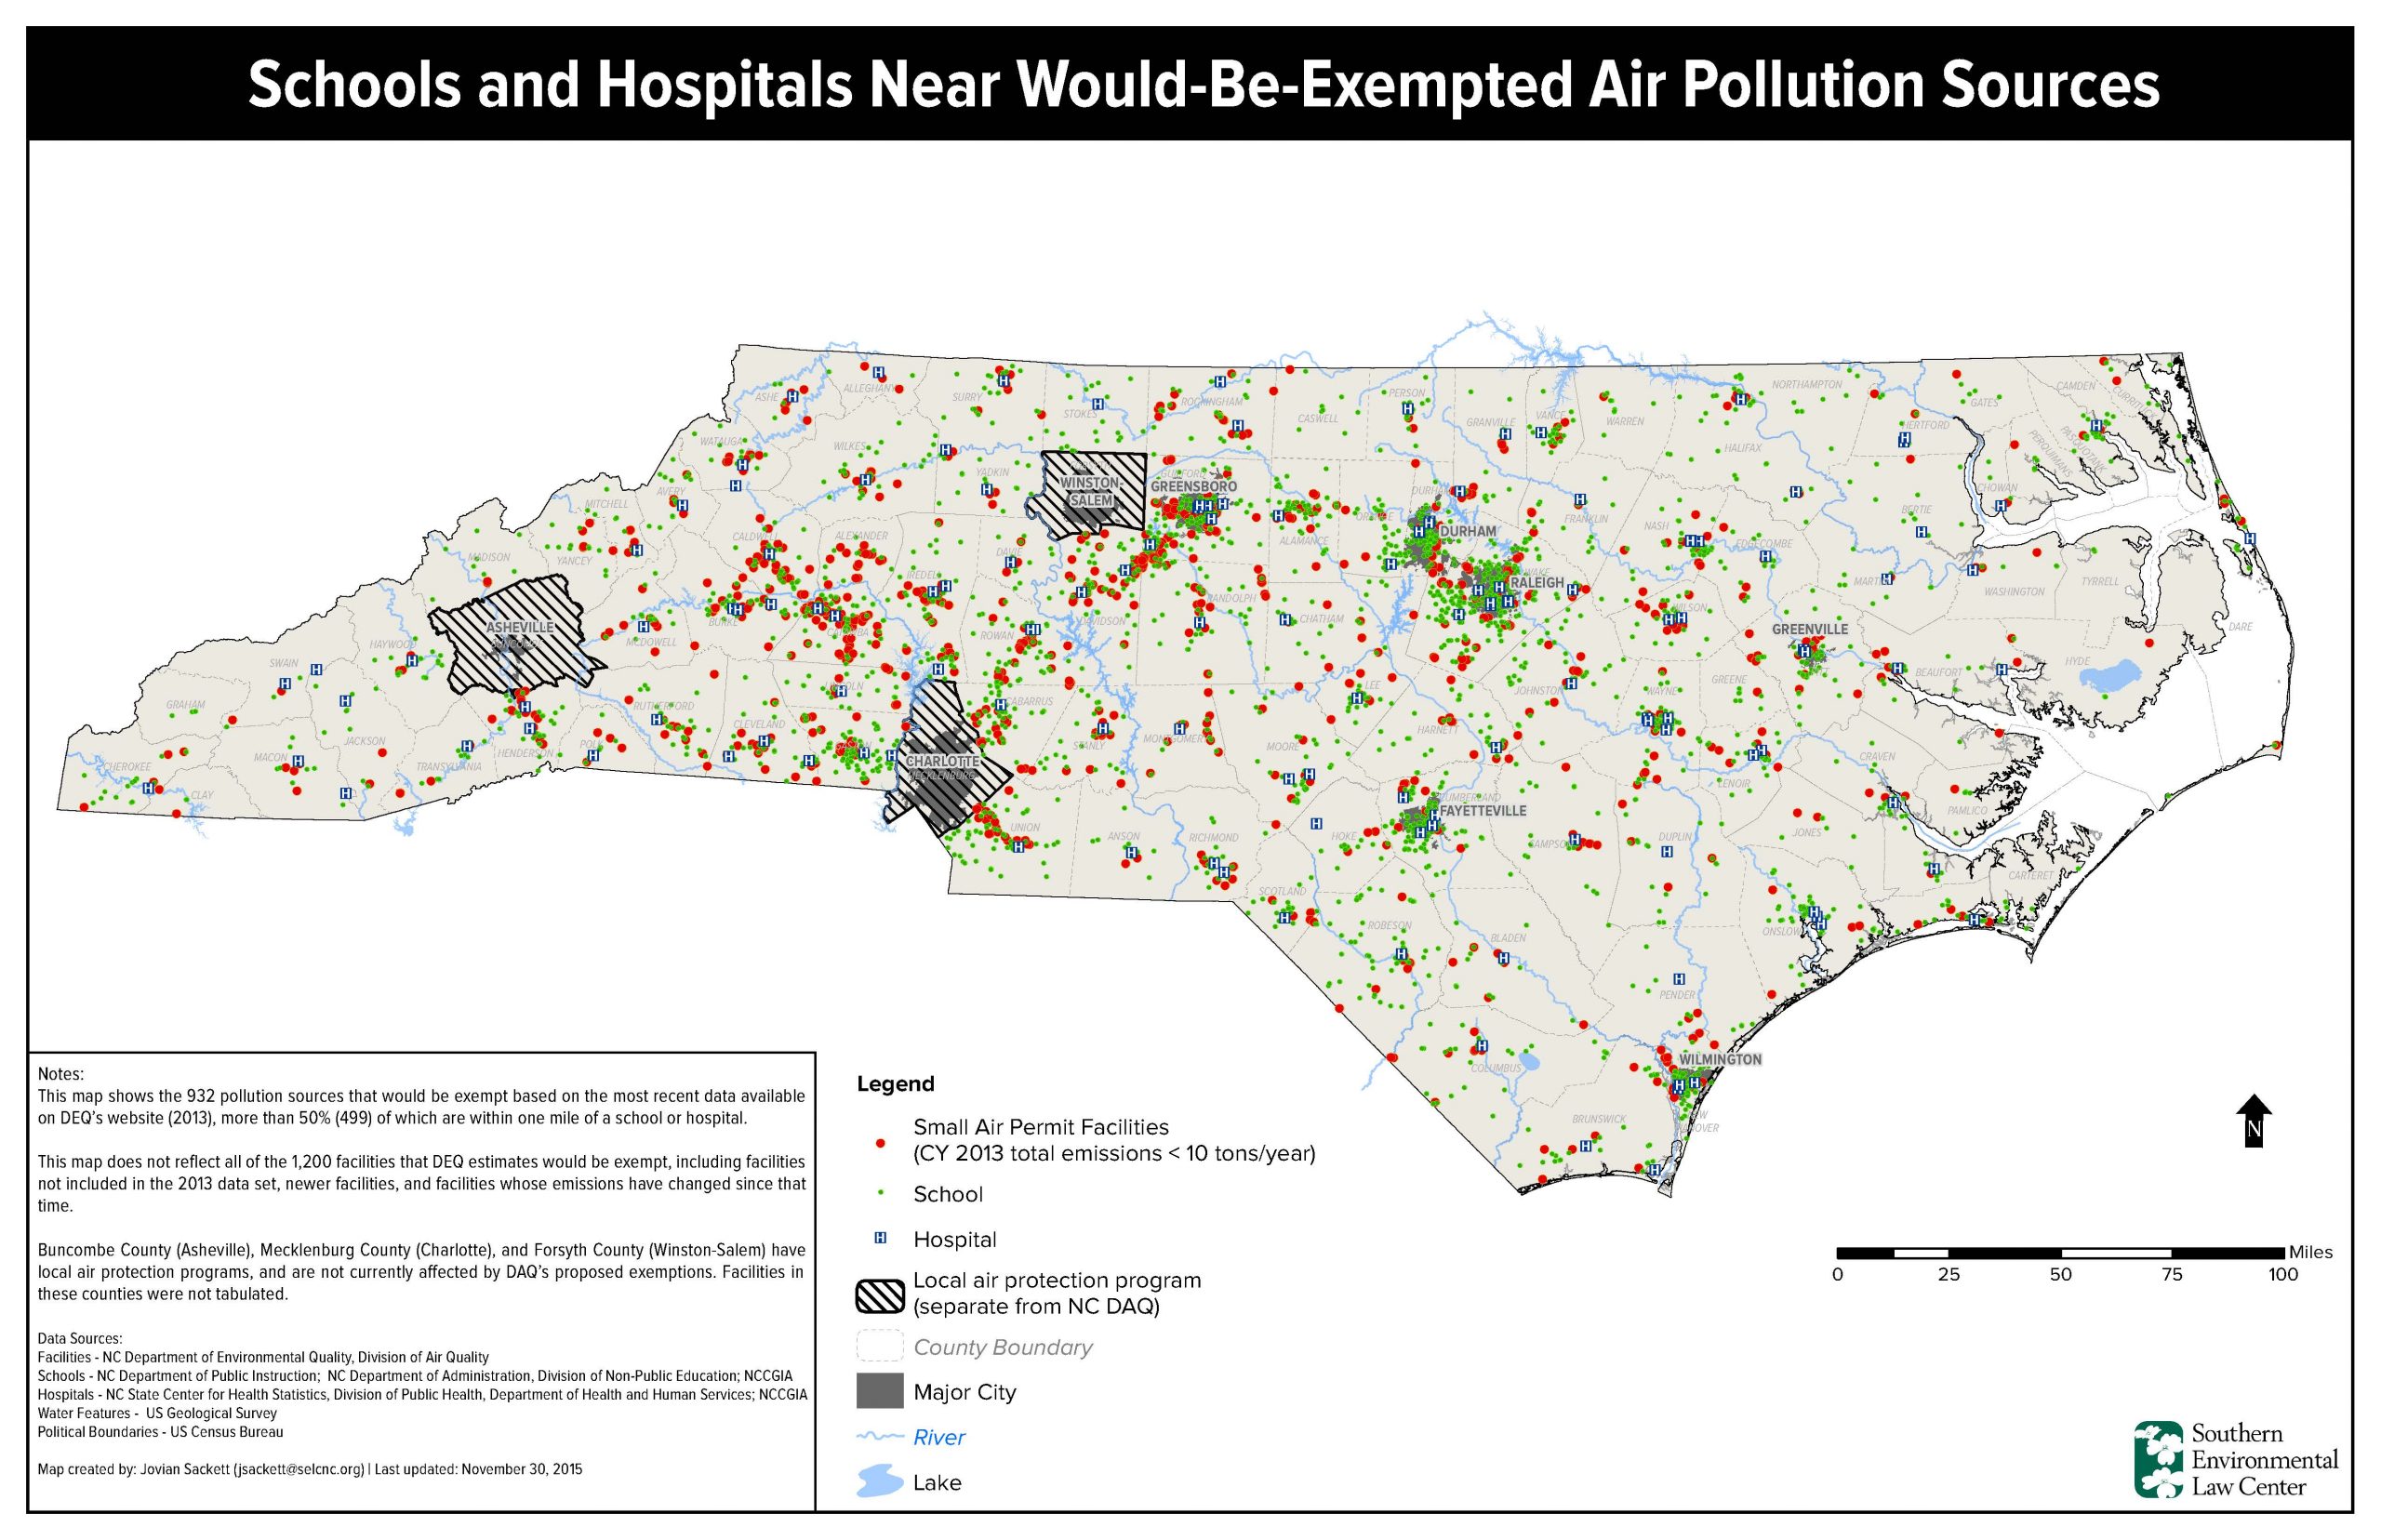 Schools and Hospitals near would-be exempted pollution sources